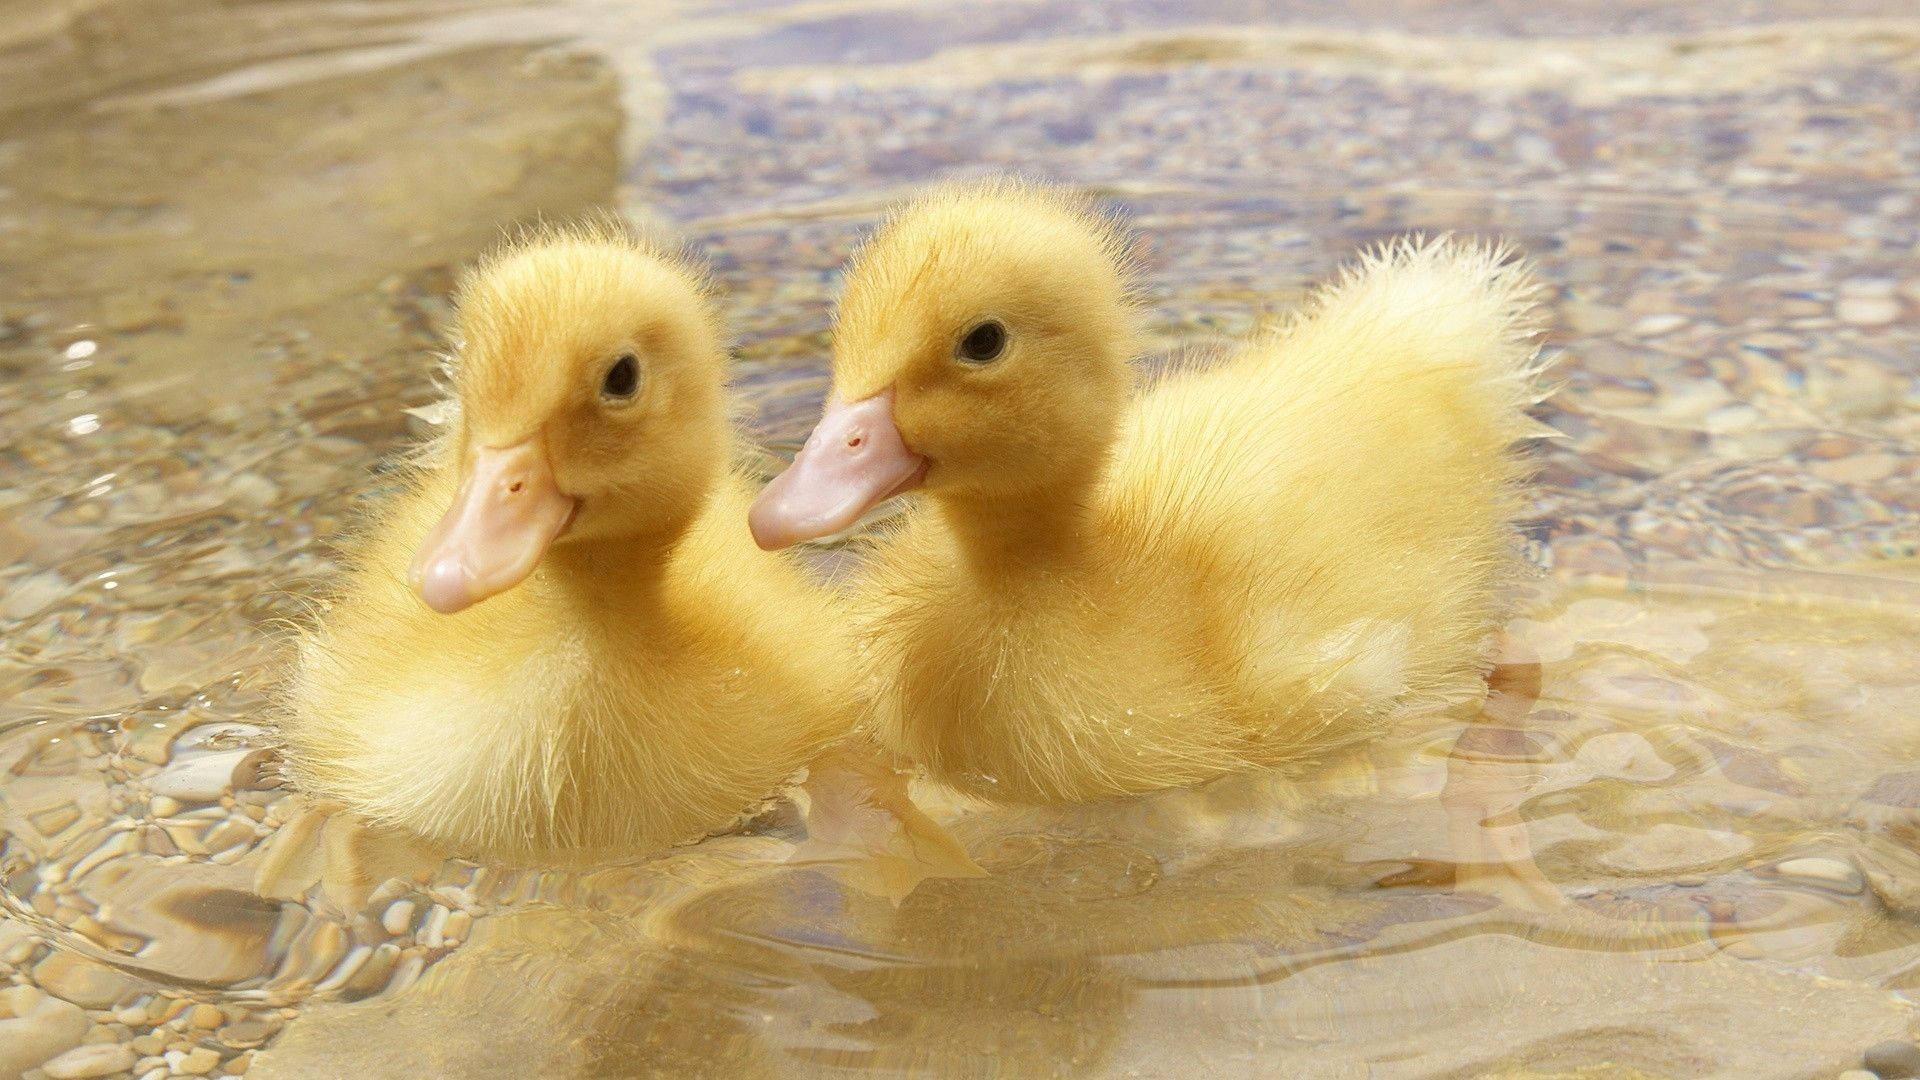 Baby Ducks Together